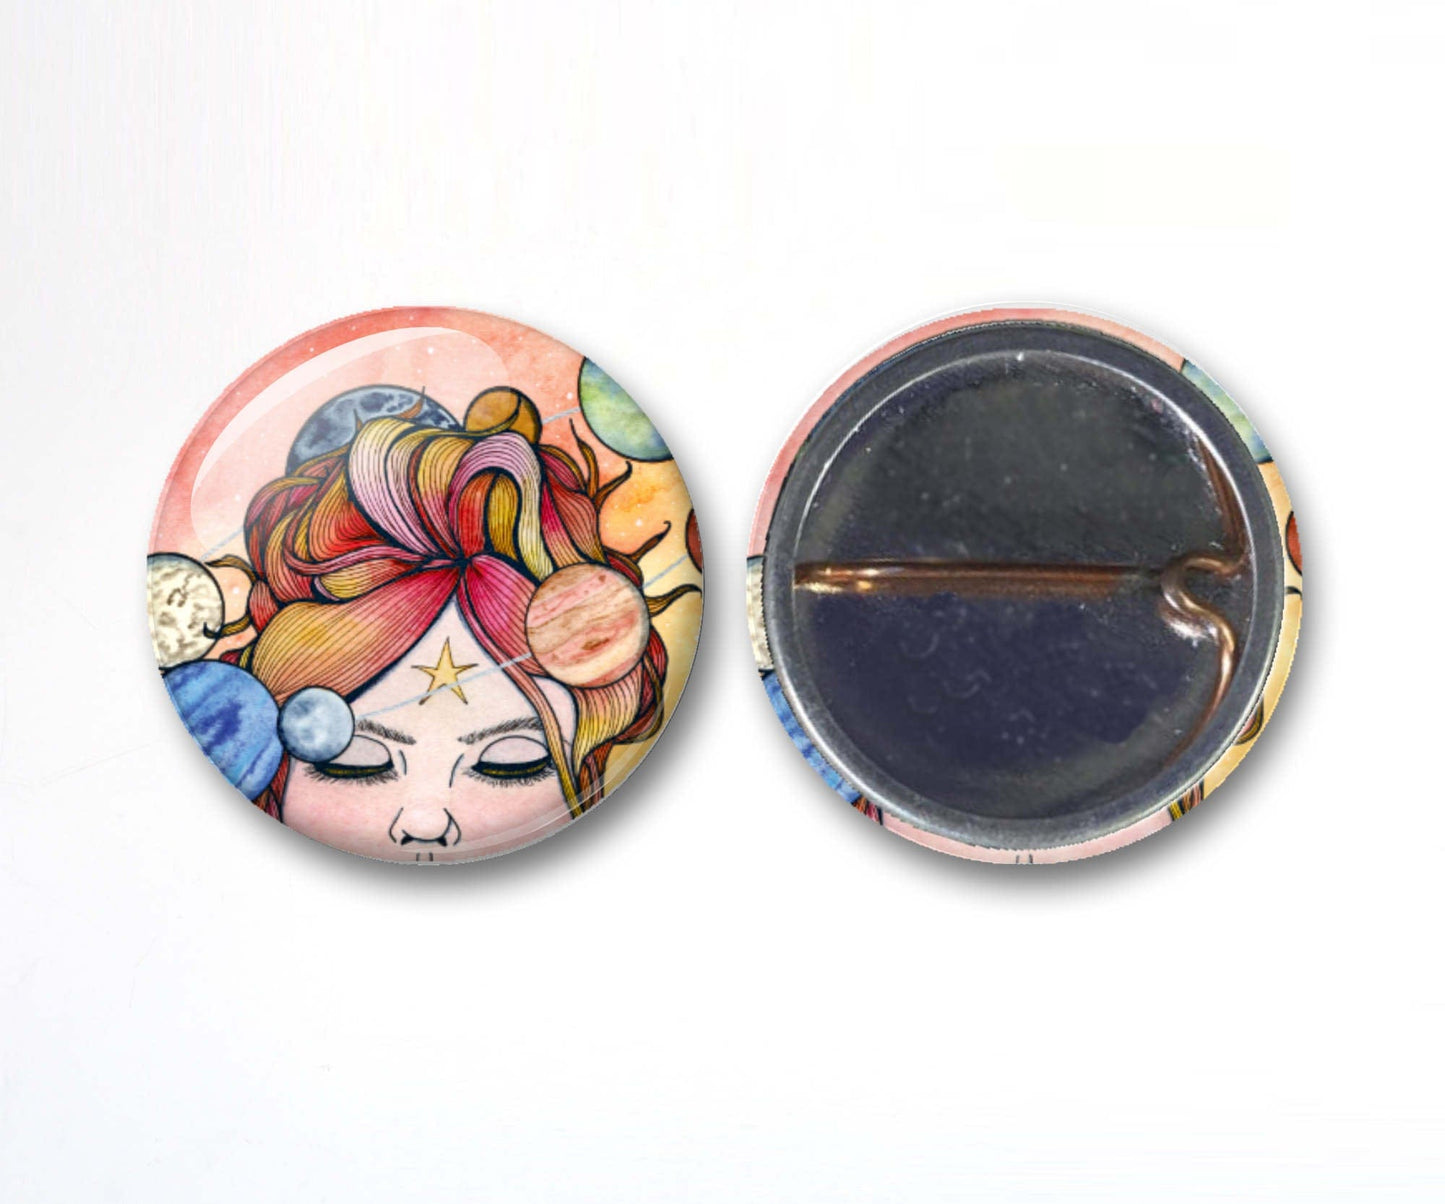 PinkPolish Design Buttons "Celestial" Button Pack - 3-Pack Pin Back Button, 1 Inch